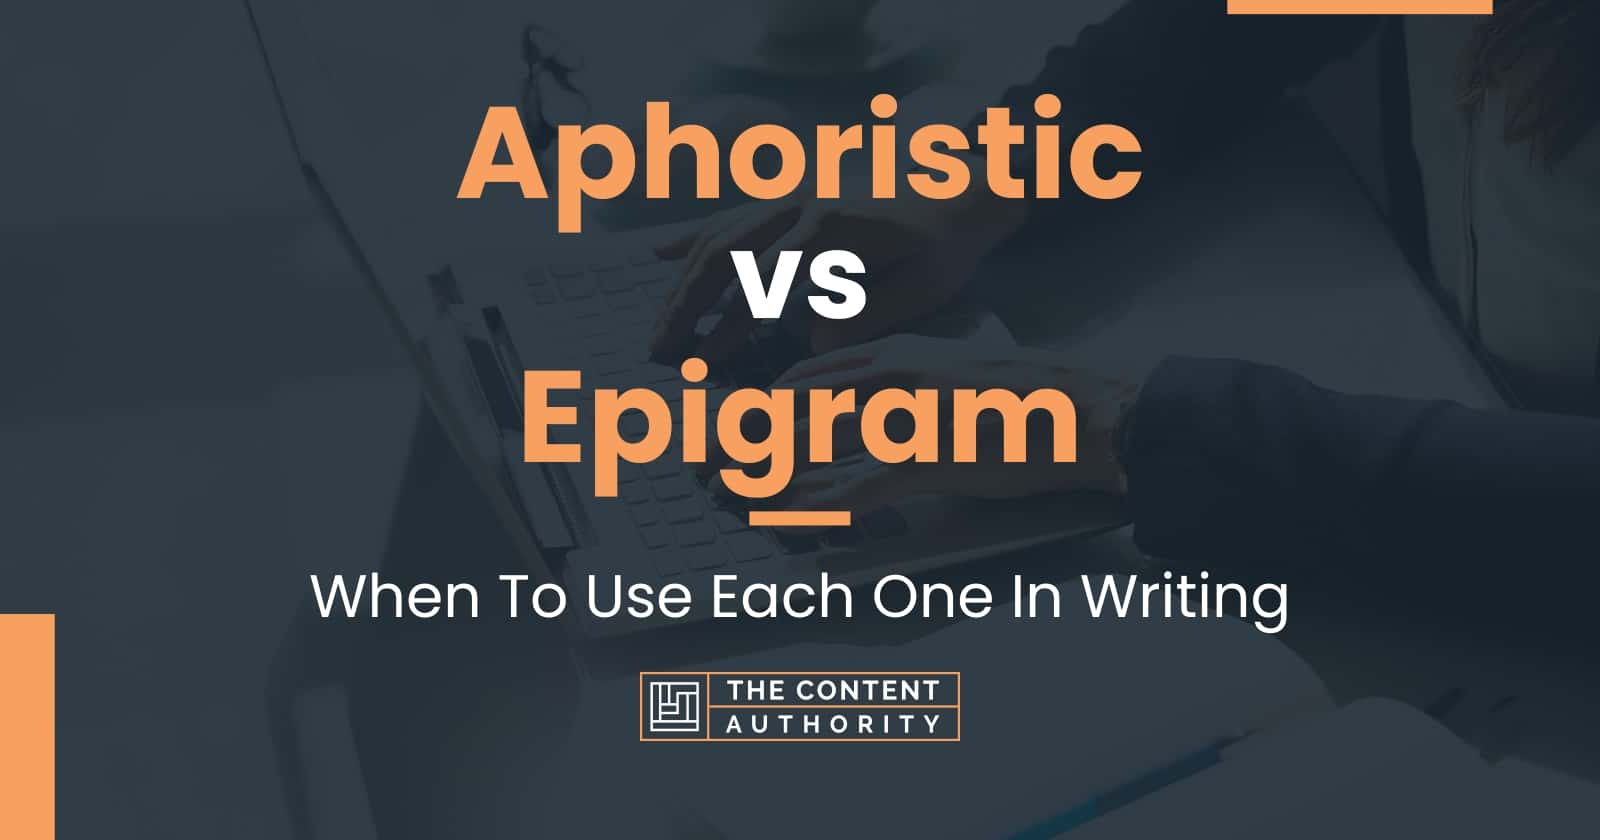 Aphoristic vs Epigram: When To Use Each One In Writing